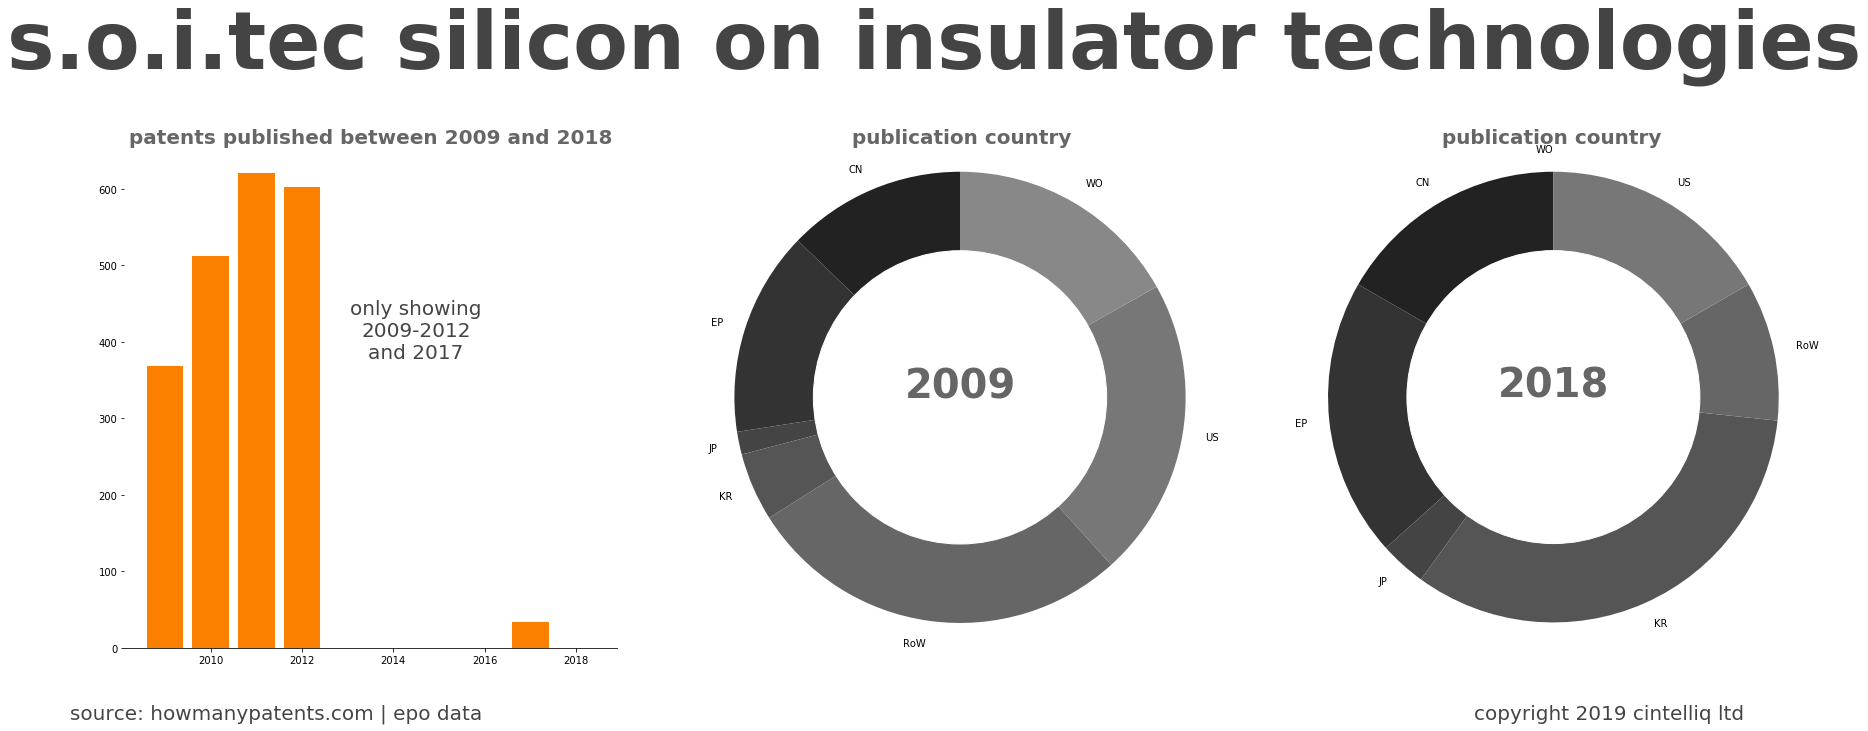 summary of patents for S.O.I.Tec Silicon On Insulator Technologies